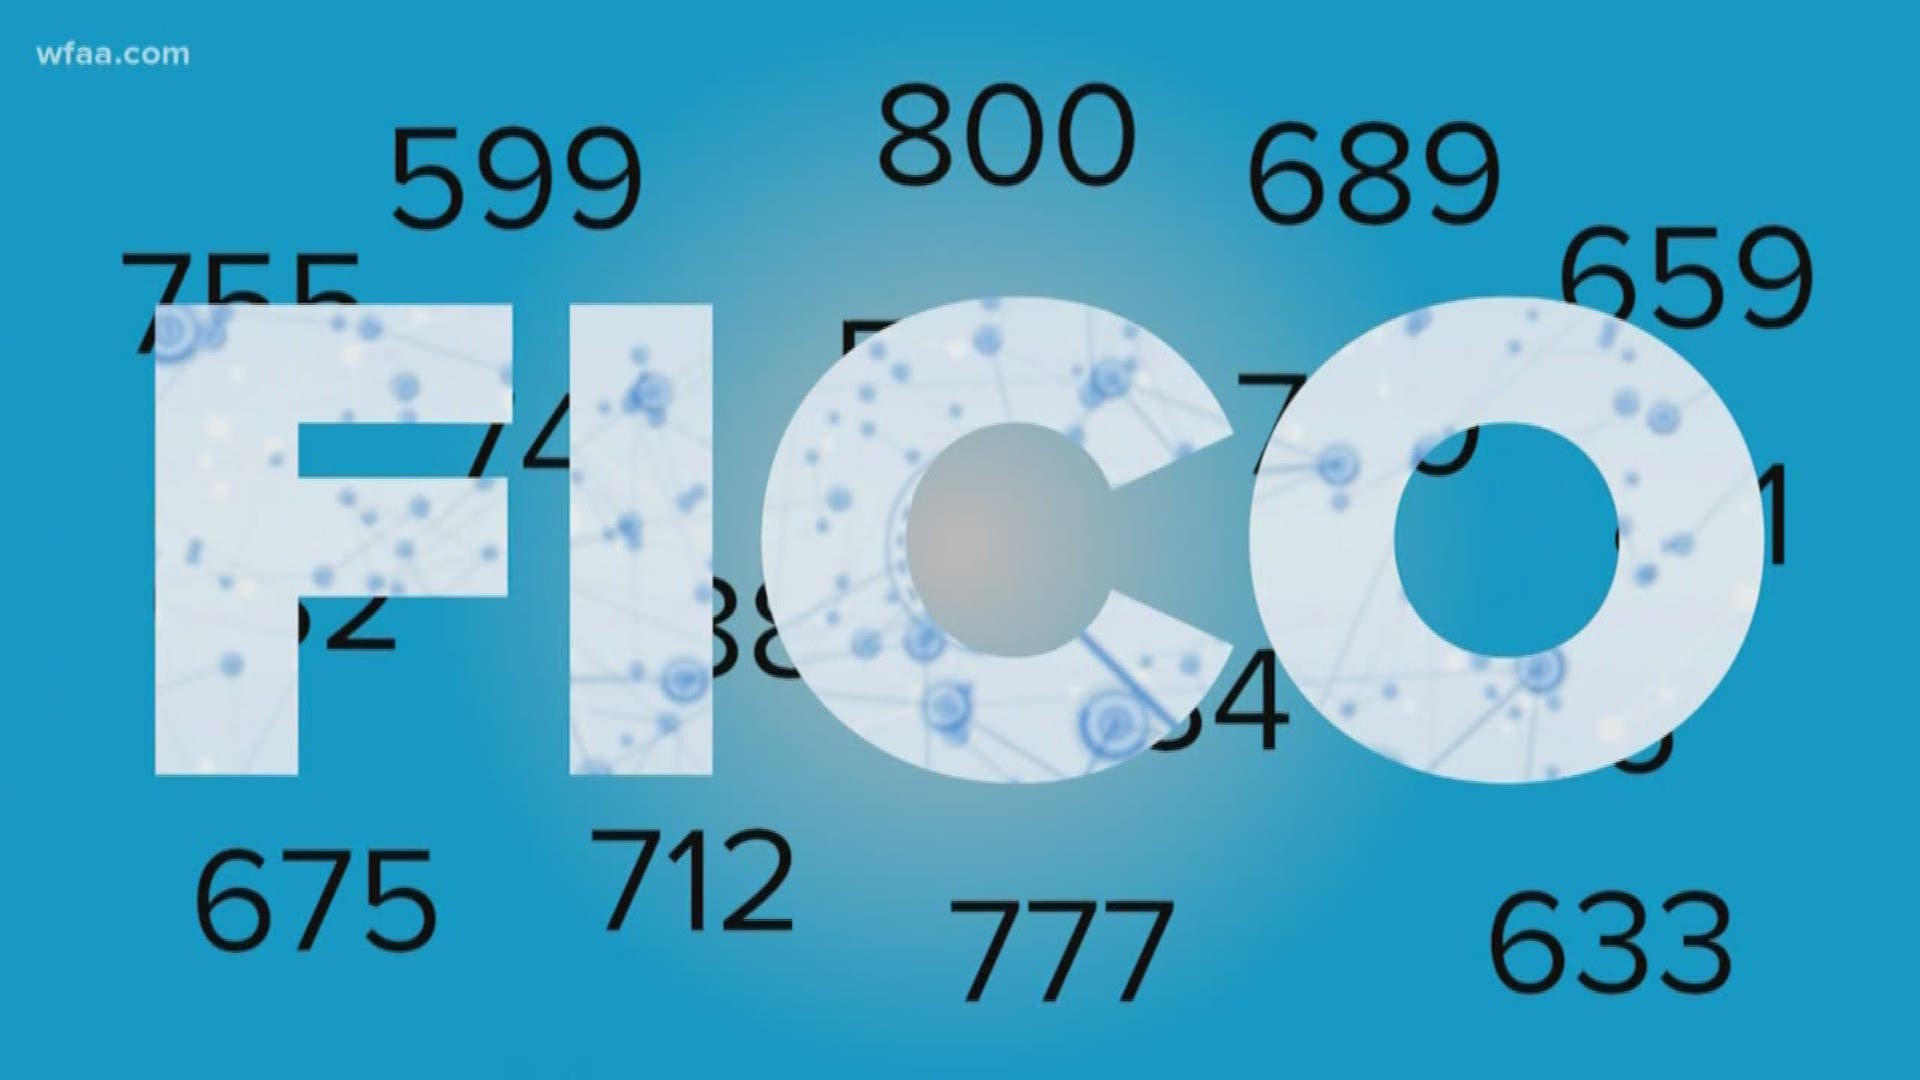 Do you know your FICO score?